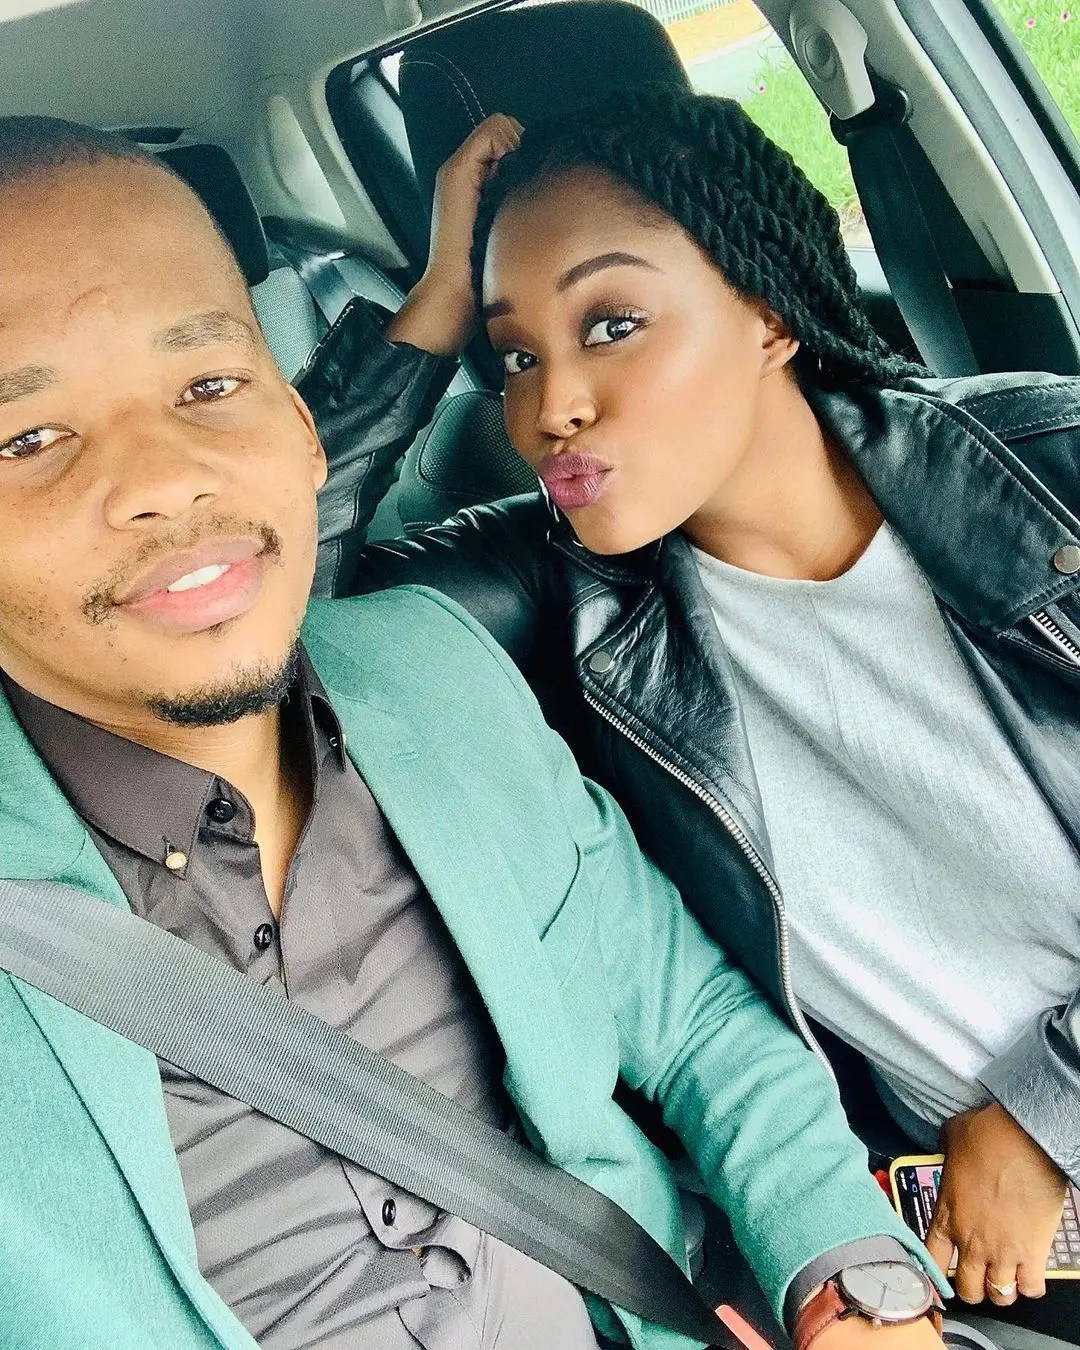 Actress Sive Mabuya reveals her hubby waited for 12years for her to accept their first date